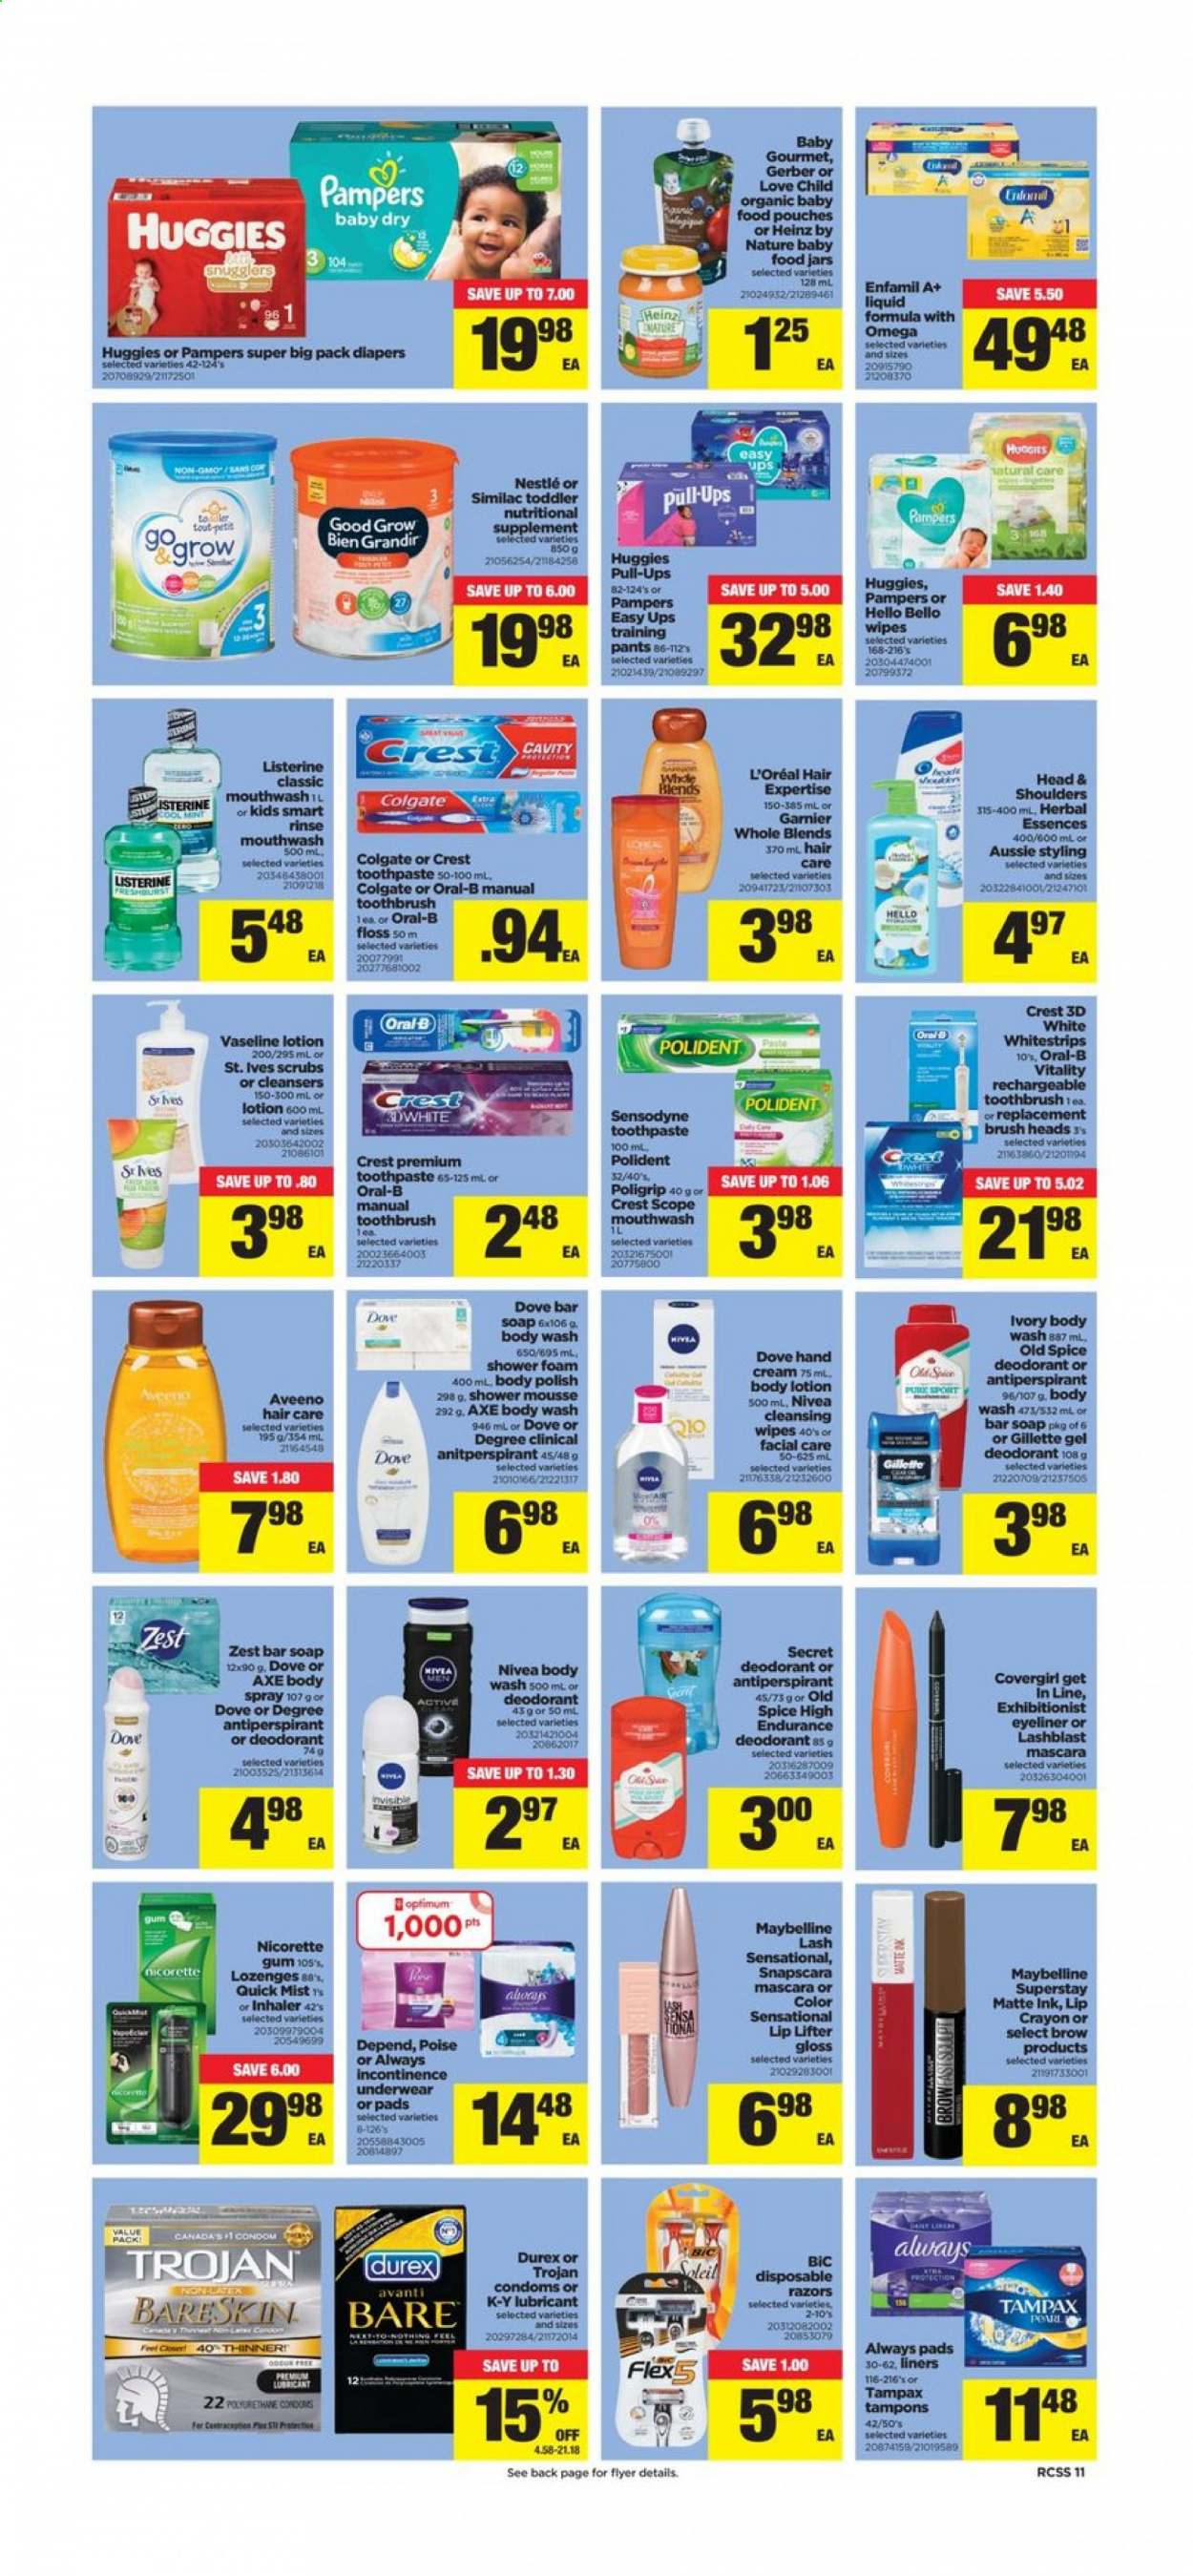 thumbnail - Real Canadian Superstore Flyer - January 07, 2021 - January 13, 2021 - Sales products - Gerber, Heinz, spice, Enfamil, Similac, organic baby food, wipes, pants, nappies, baby pants, Aveeno, body wash, Vaseline, soap bar, soap, toothbrush, toothpaste, mouthwash, Polident, Crest, Always pads, incontinence underwear, tampons, L’Oréal, Aussie, Herbal Essences, body lotion, hand cream, anti-perspirant, BIC, lubricant, polish, lip crayon, Snapscara, eyeliner, pan, jar, Optimum, Nicorette, Nestlé, Garnier, Gillette, Listerine, mascara, Maybelline, Tampax, Huggies, Pampers, Nivea, Old Spice, Oral-B, Sensodyne, deodorant. Page 12.